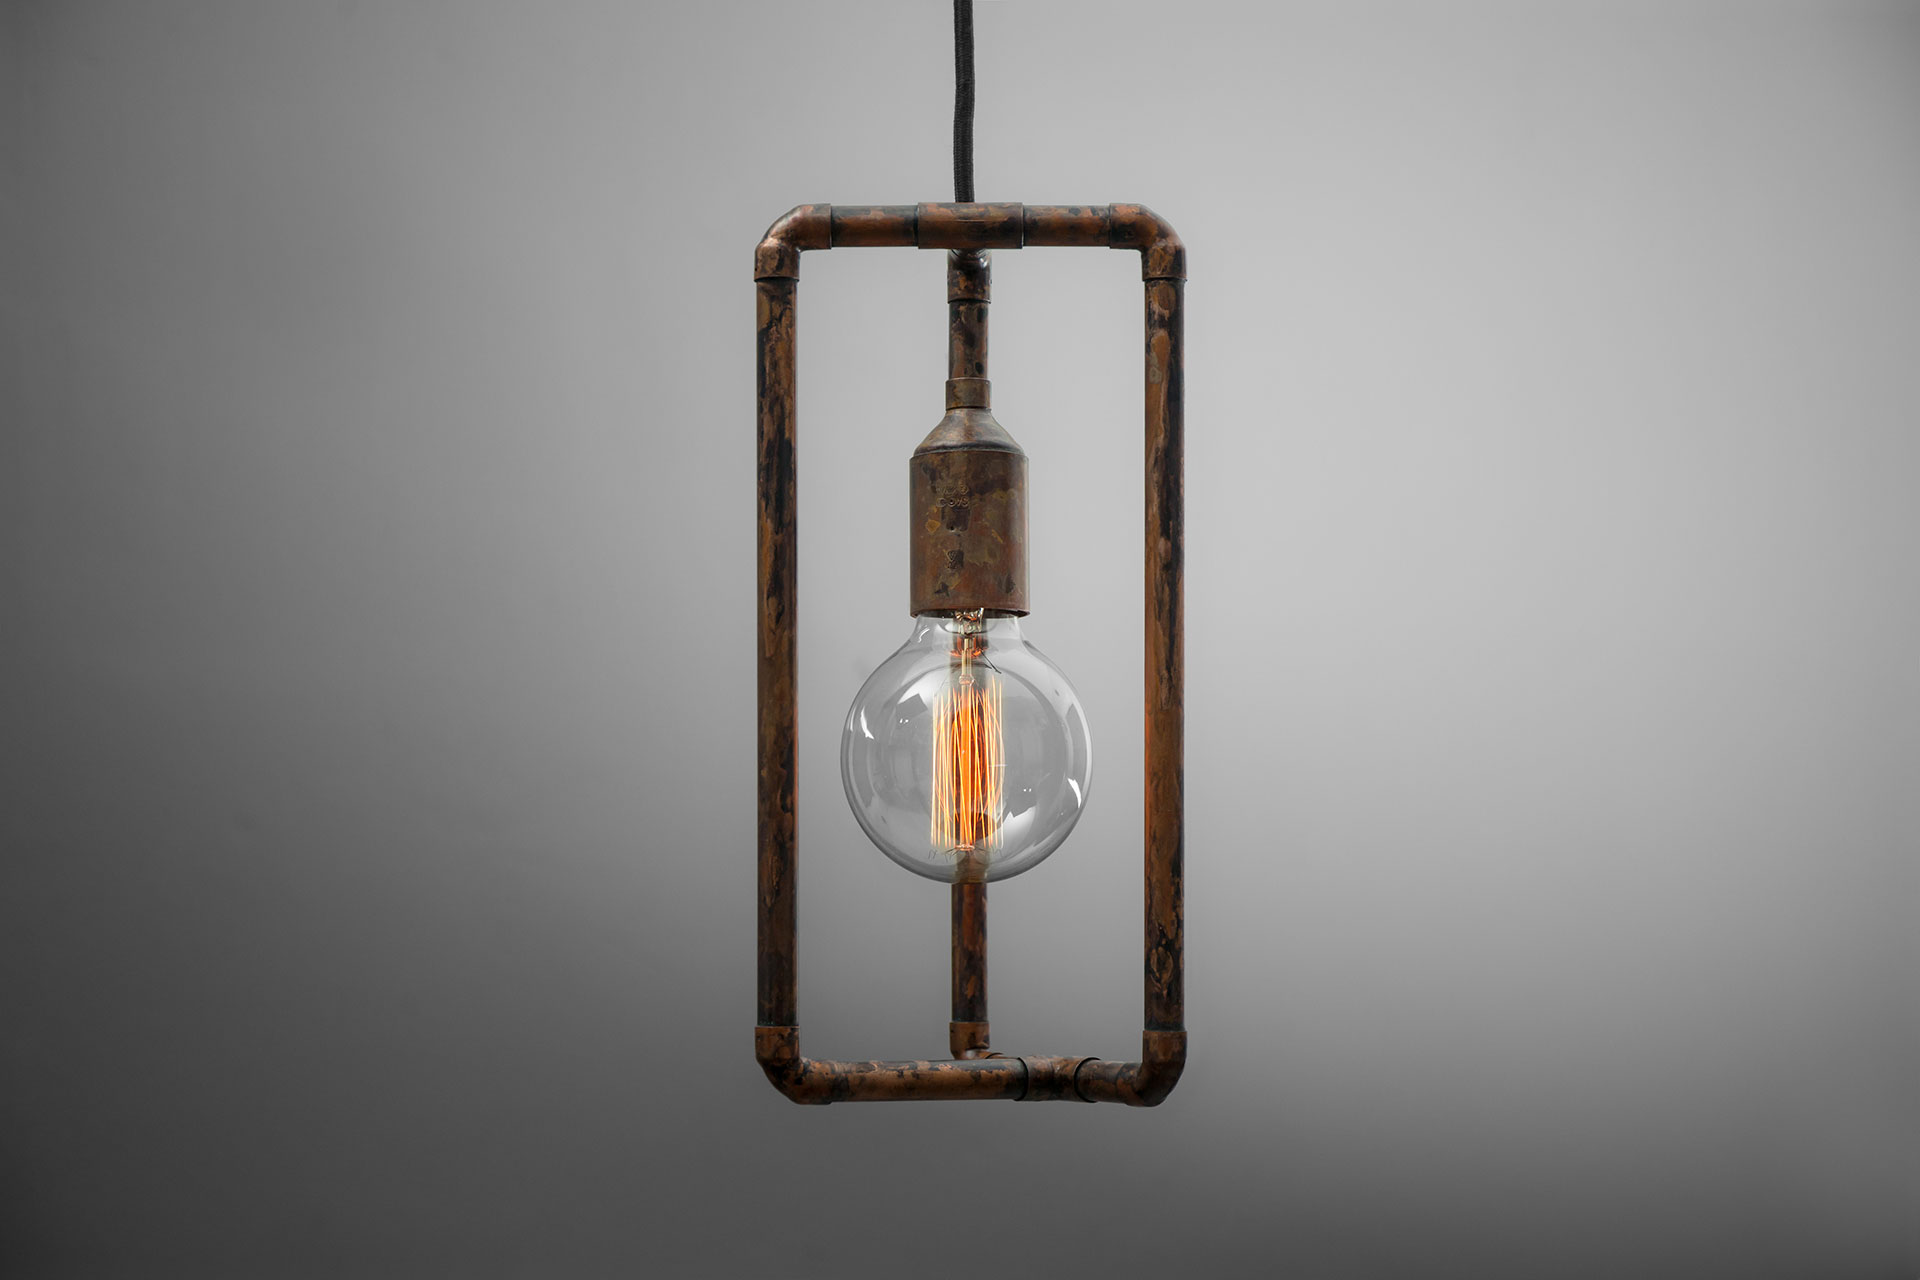 Rusty pendant lamp with vintage Edison bulb inspired by industrial design